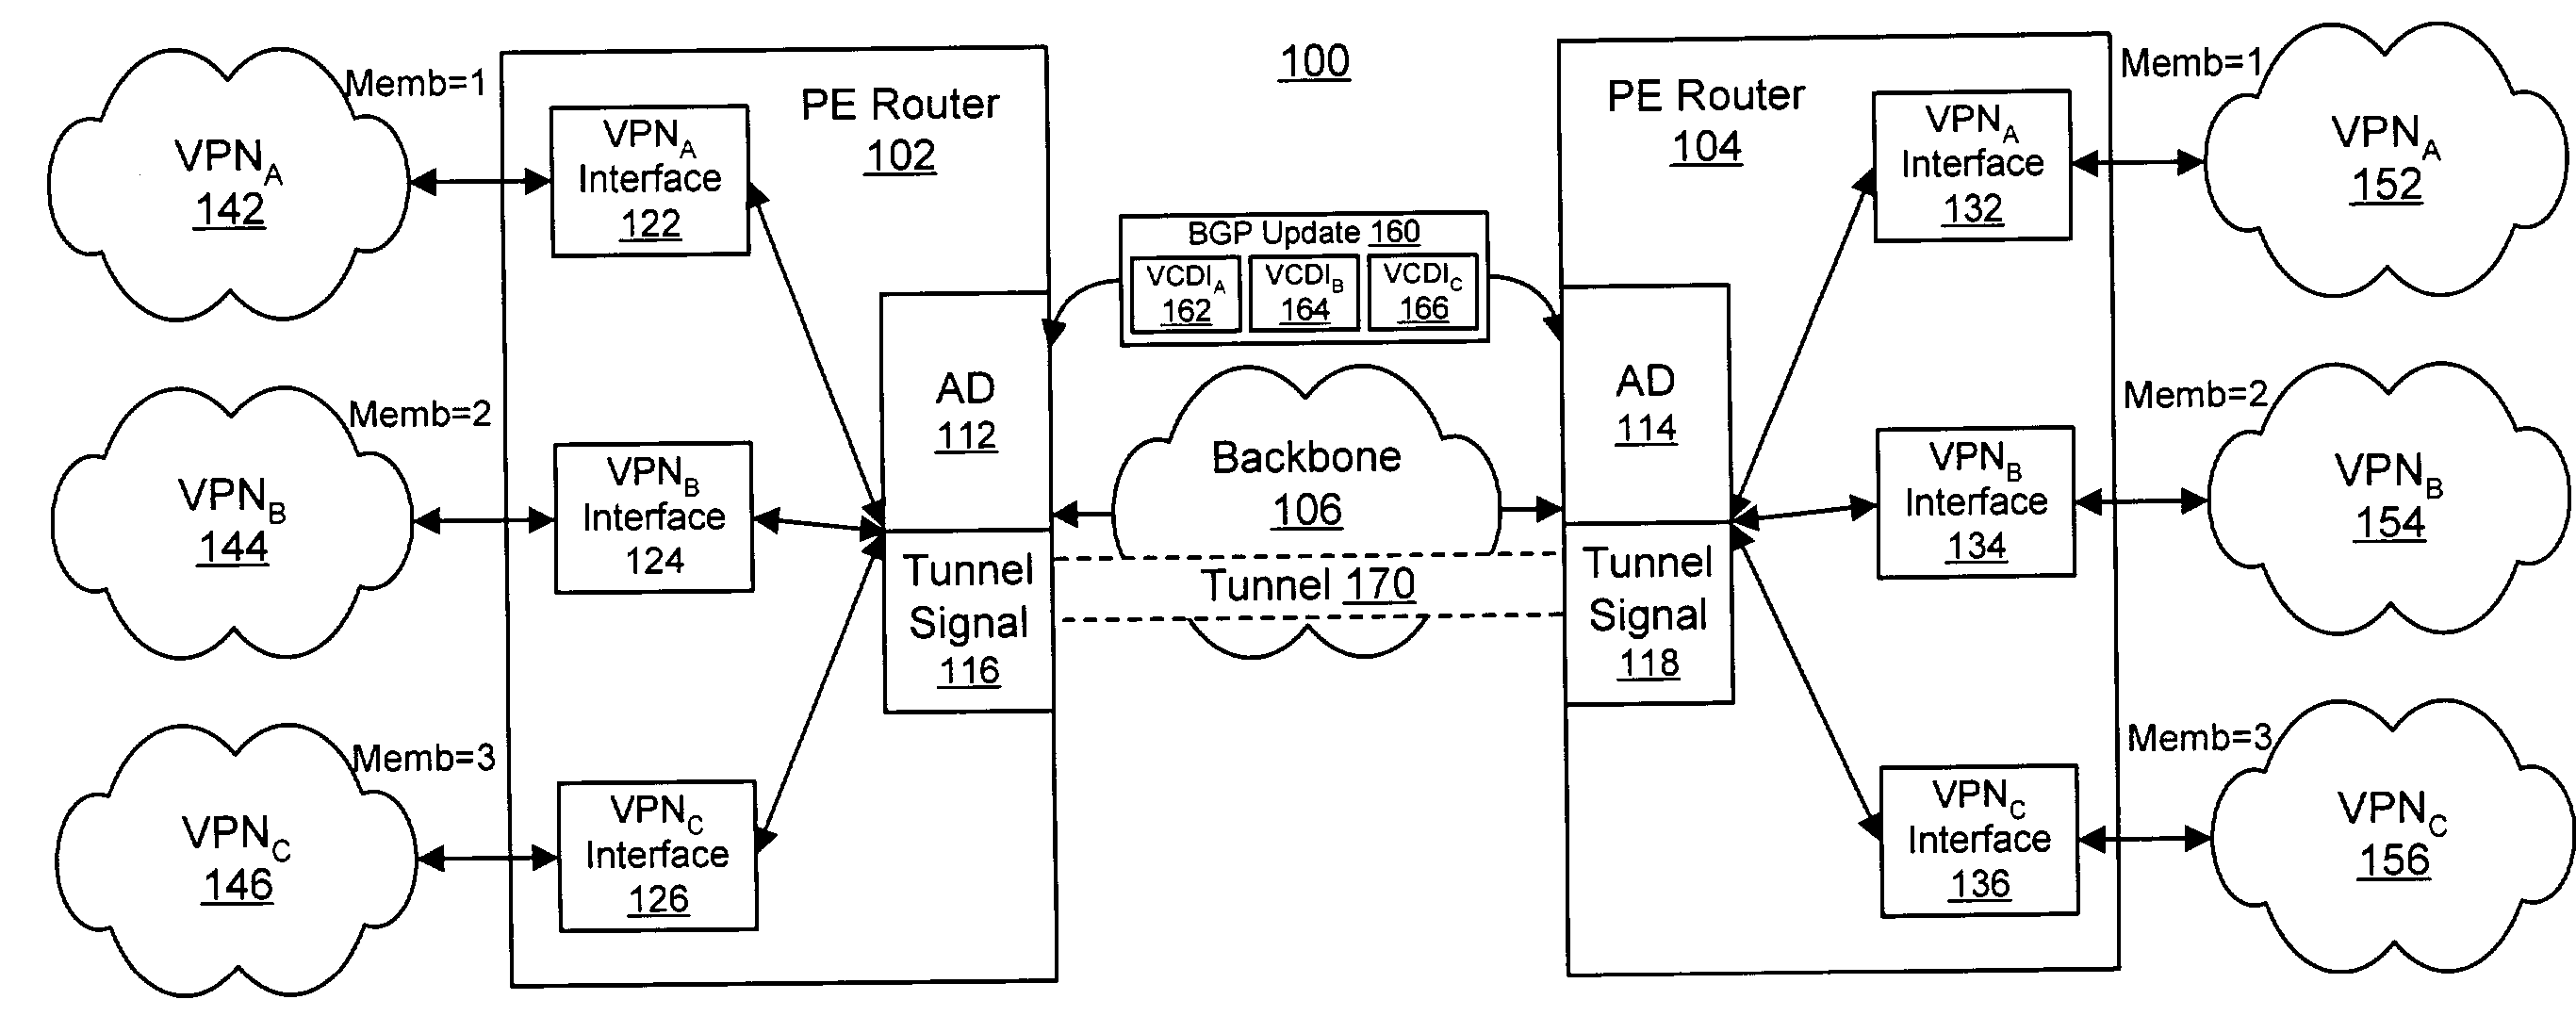 Resource allocation using an auto-discovery mechanism for provider-provisioned layer-2 and layer-3 virtual private networks